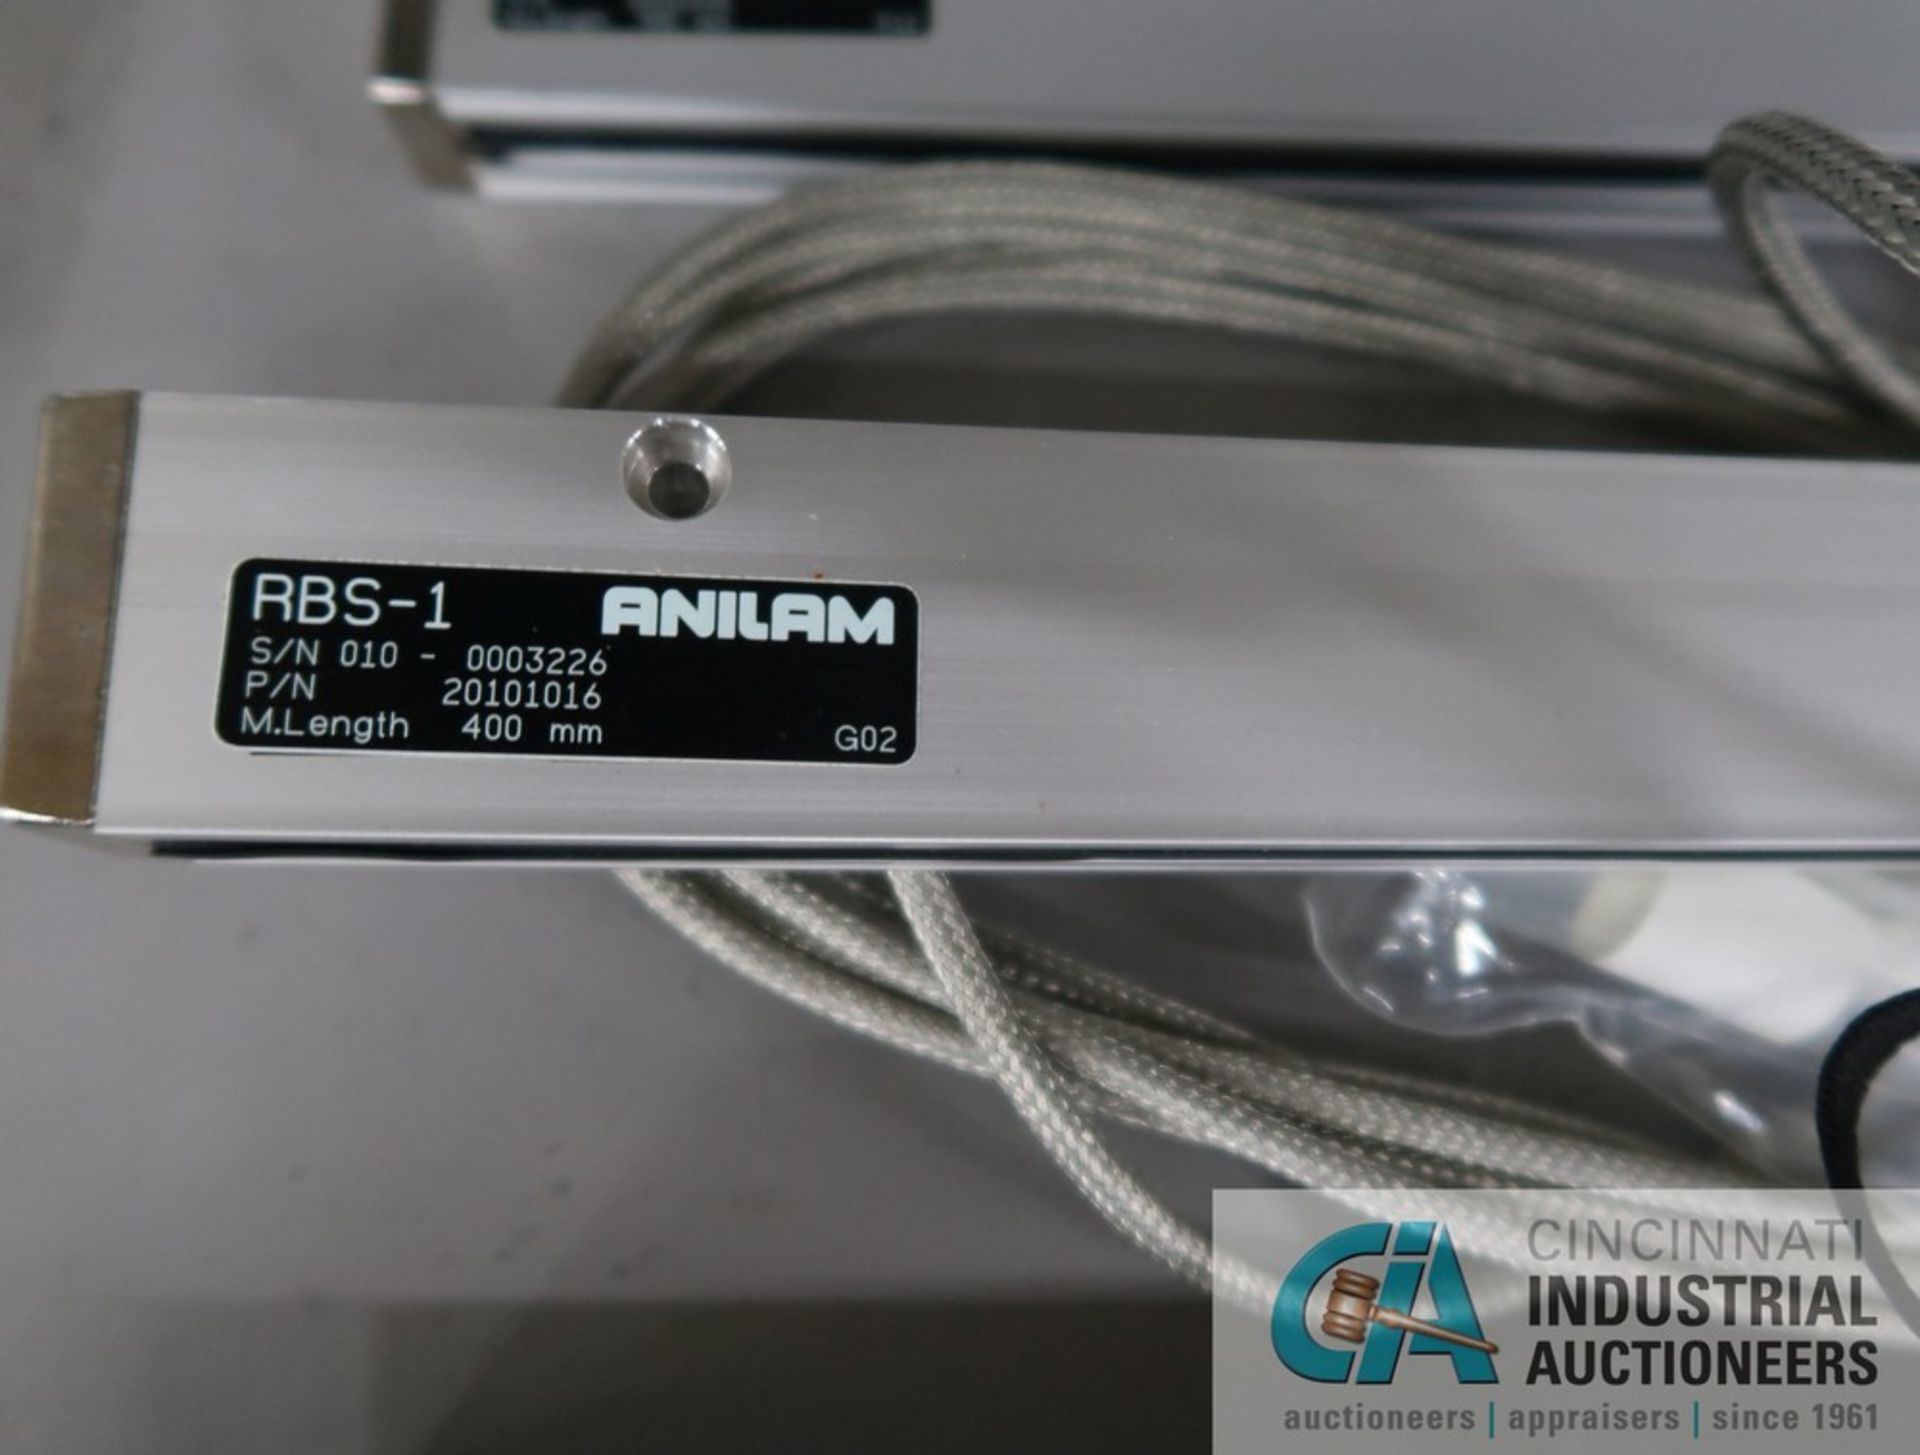 ENCODERS, (1) 900 MM, (1) 400 MM ANILAM RBS-1 AND (1) 750 MM ANILAM PGS-P ENCODERS *BRAND NEW* - Image 3 of 4